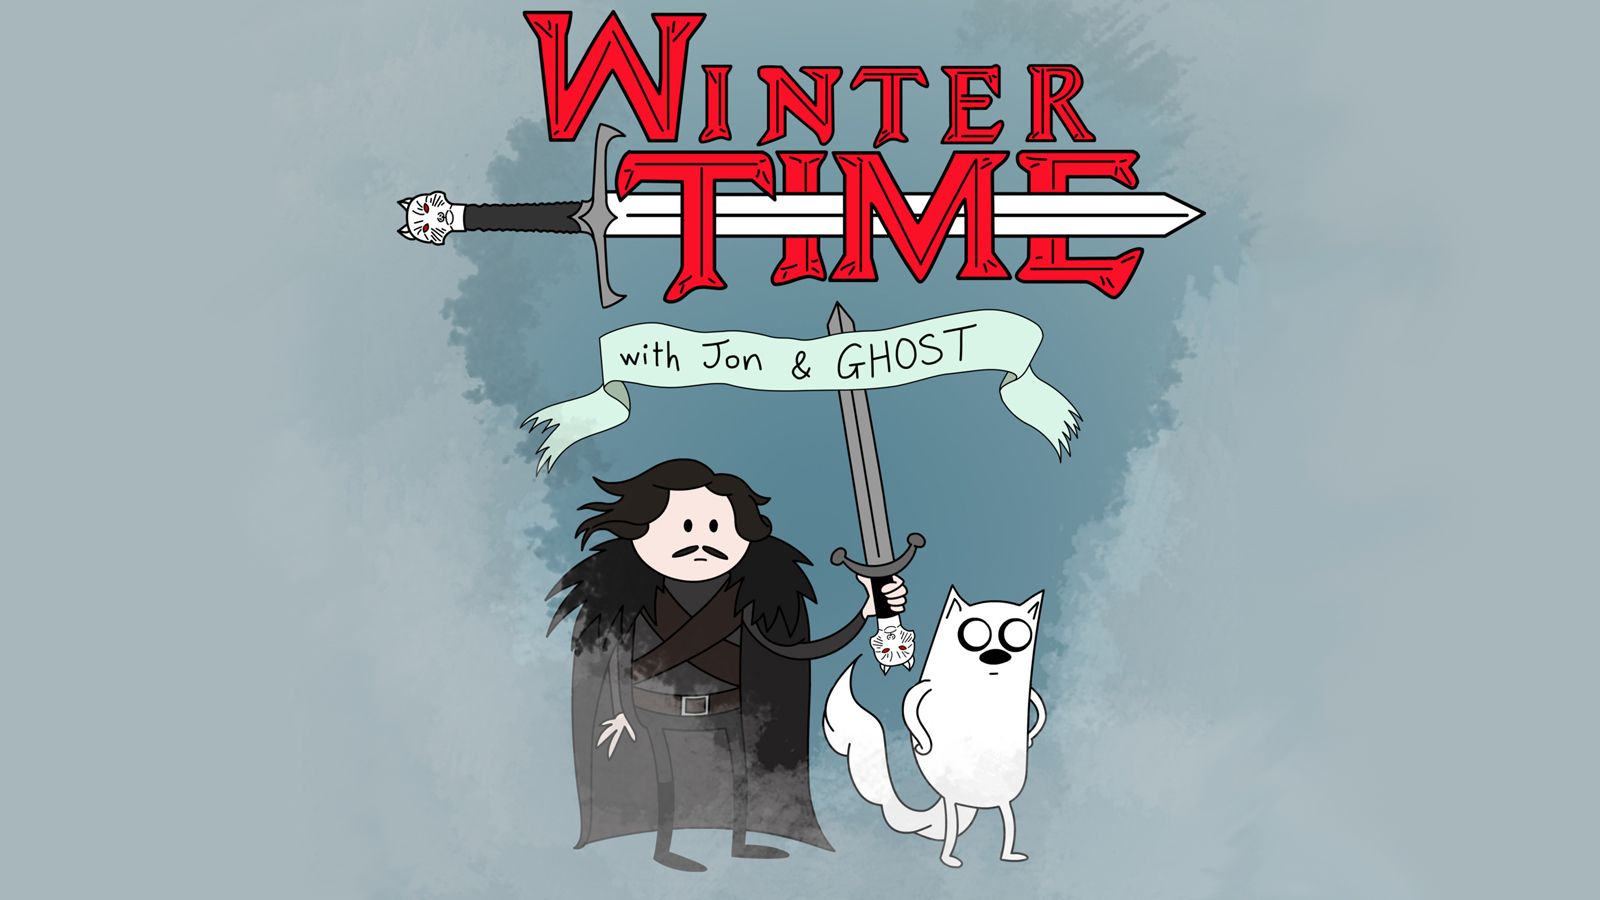 humor, movie, a song of ice and fire, adventure time, game of thrones, ghost, jon snow